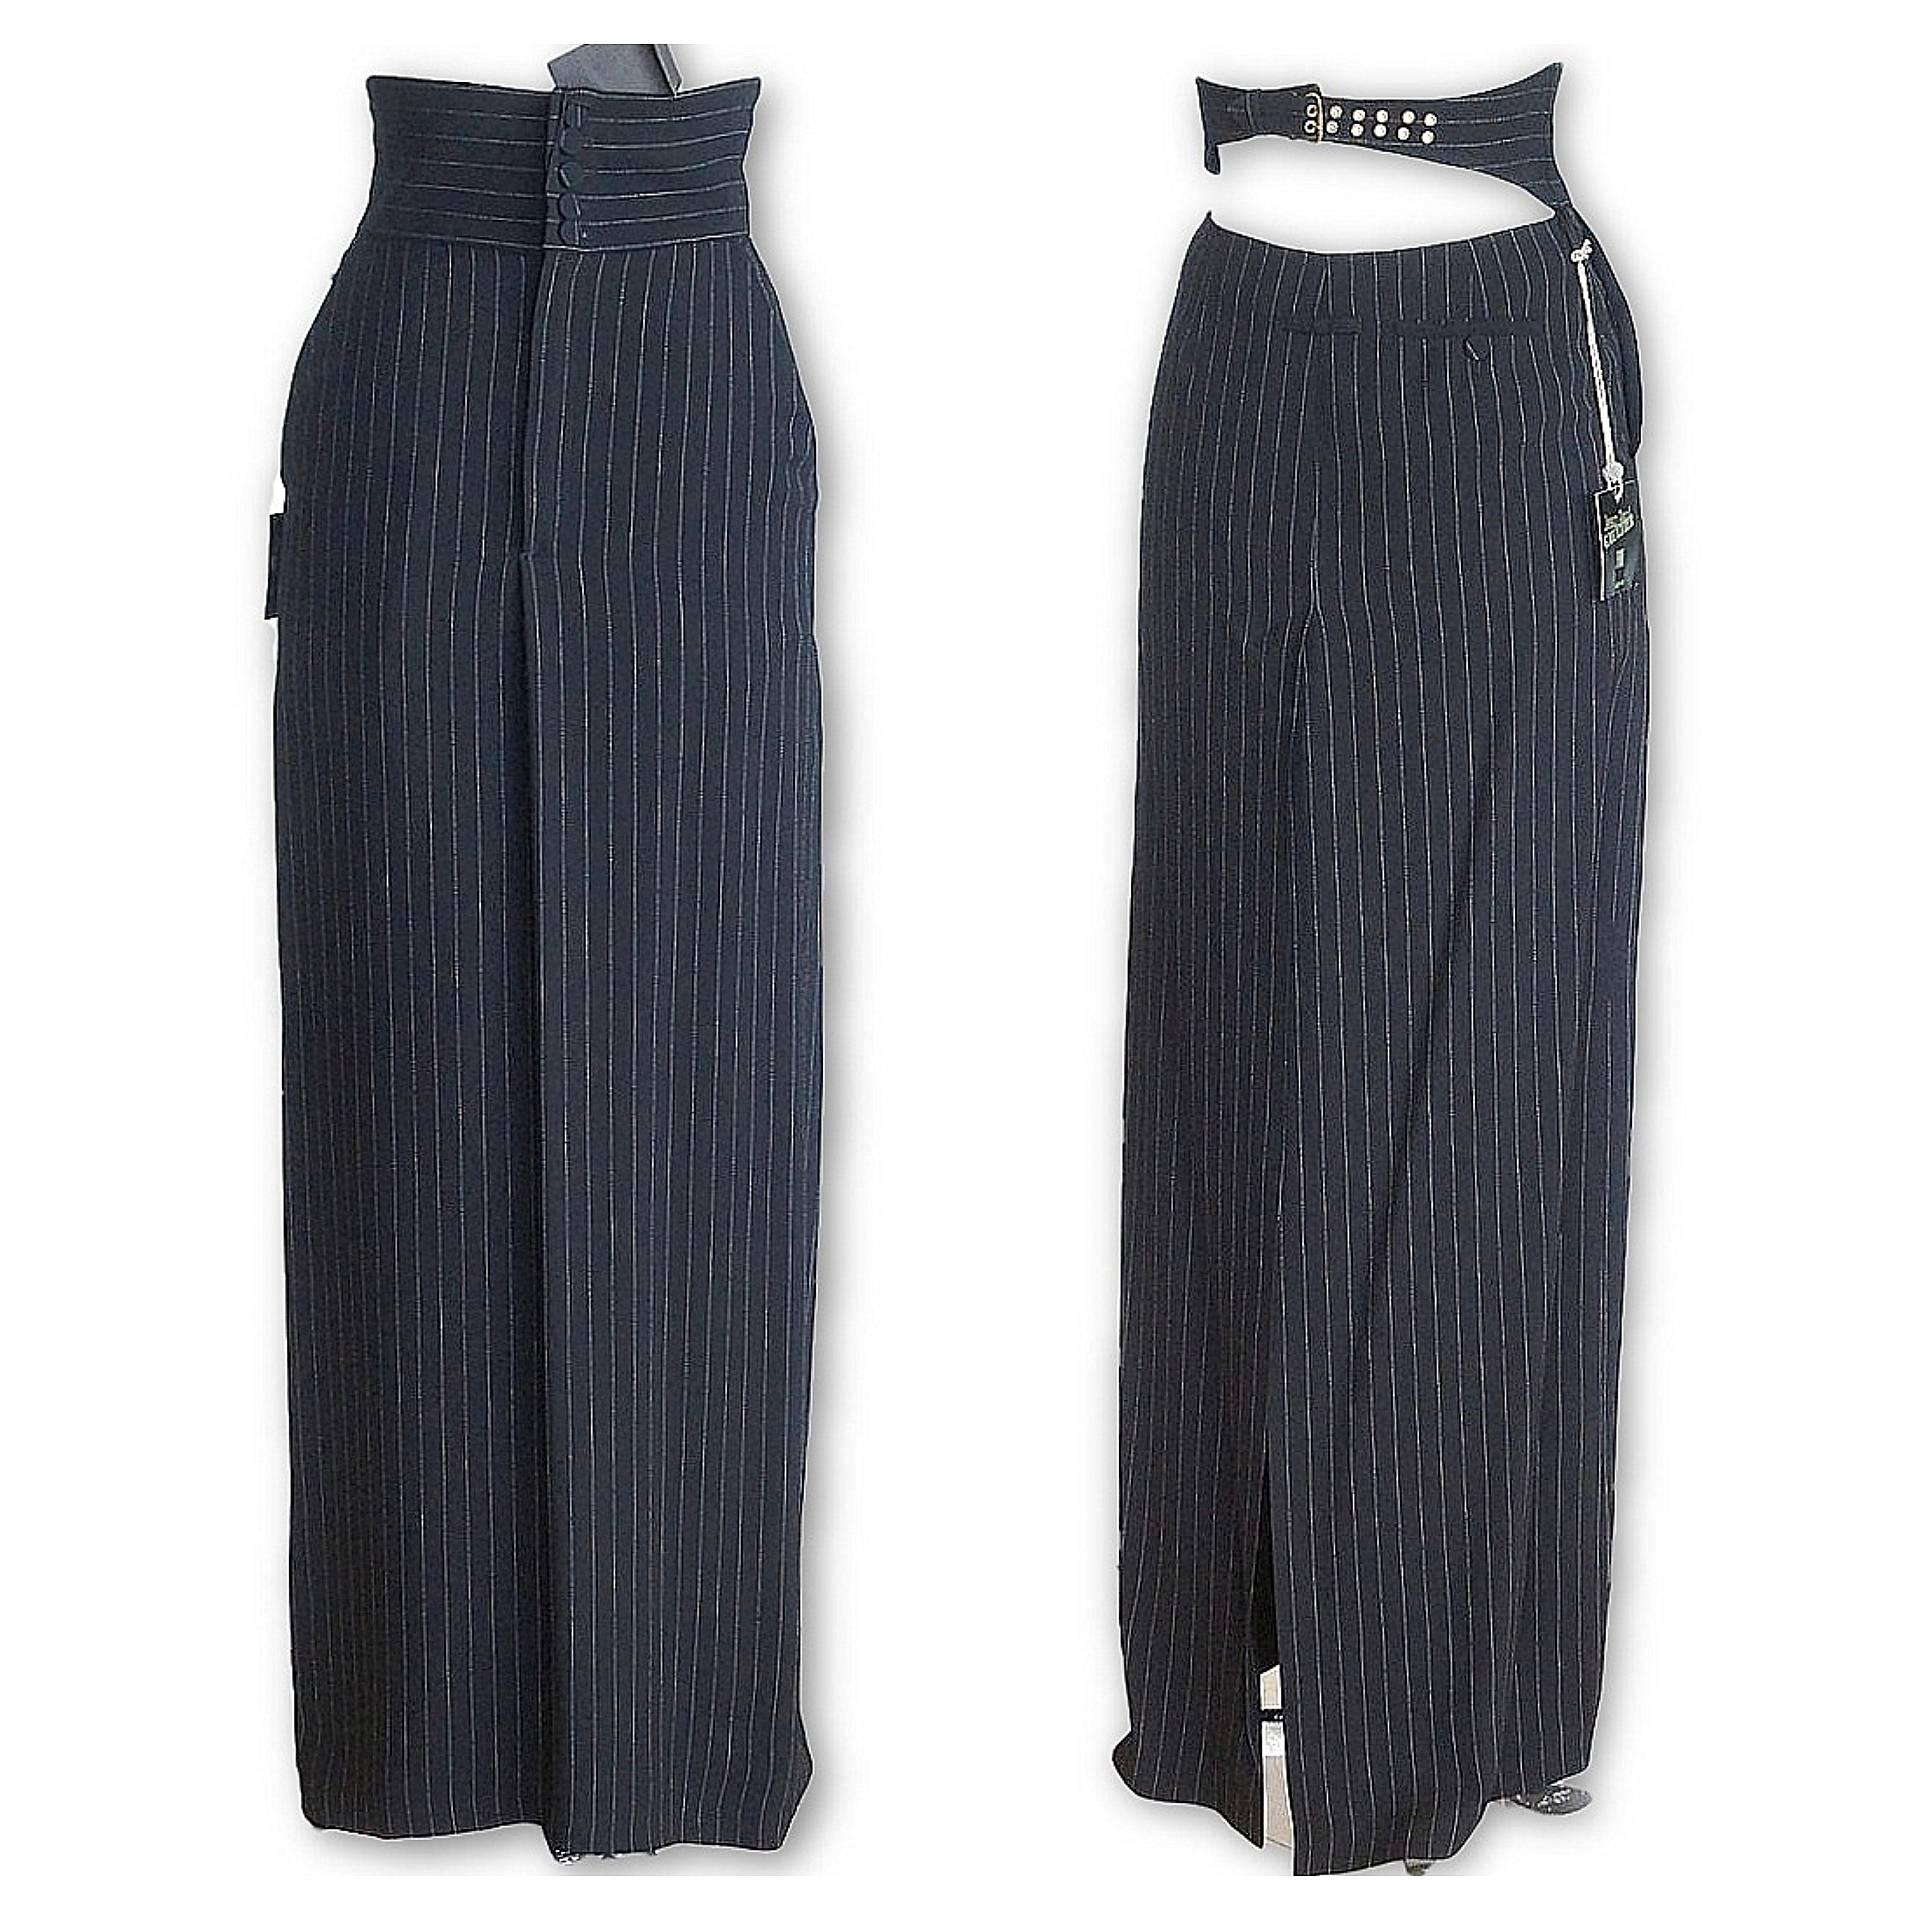 Guaranteed authentic JEAN PAUL GAULTER vintage long pinstripe pencil skirt with sensational details. 
Front effect is a high waisted trouser cumberband 5 covered buttons. 
Front fly zip and soft pleat in center.
2 Angled pockets.
Rear  cumberbaund